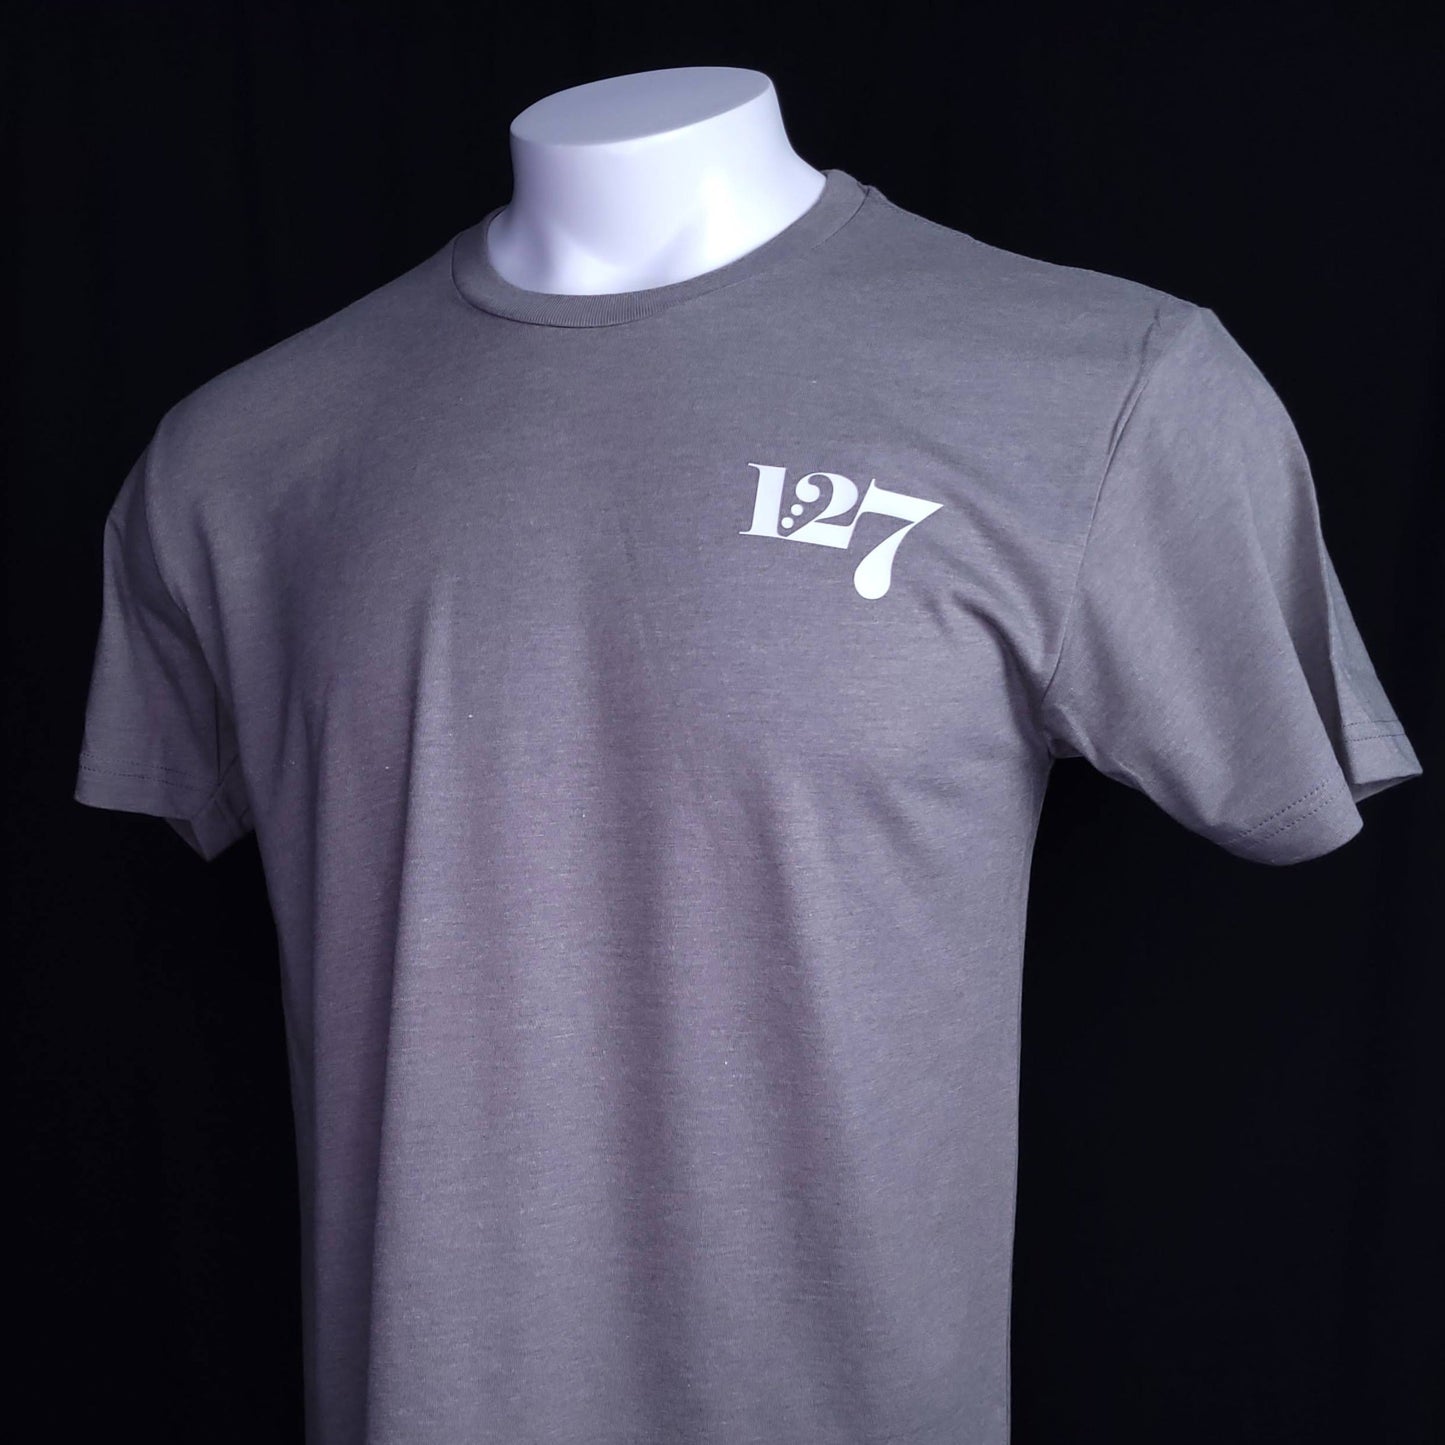 1:27 Signature . Left chest, Christian T-shirt, Made in the Image of God Shirt. 1:27 Clothing